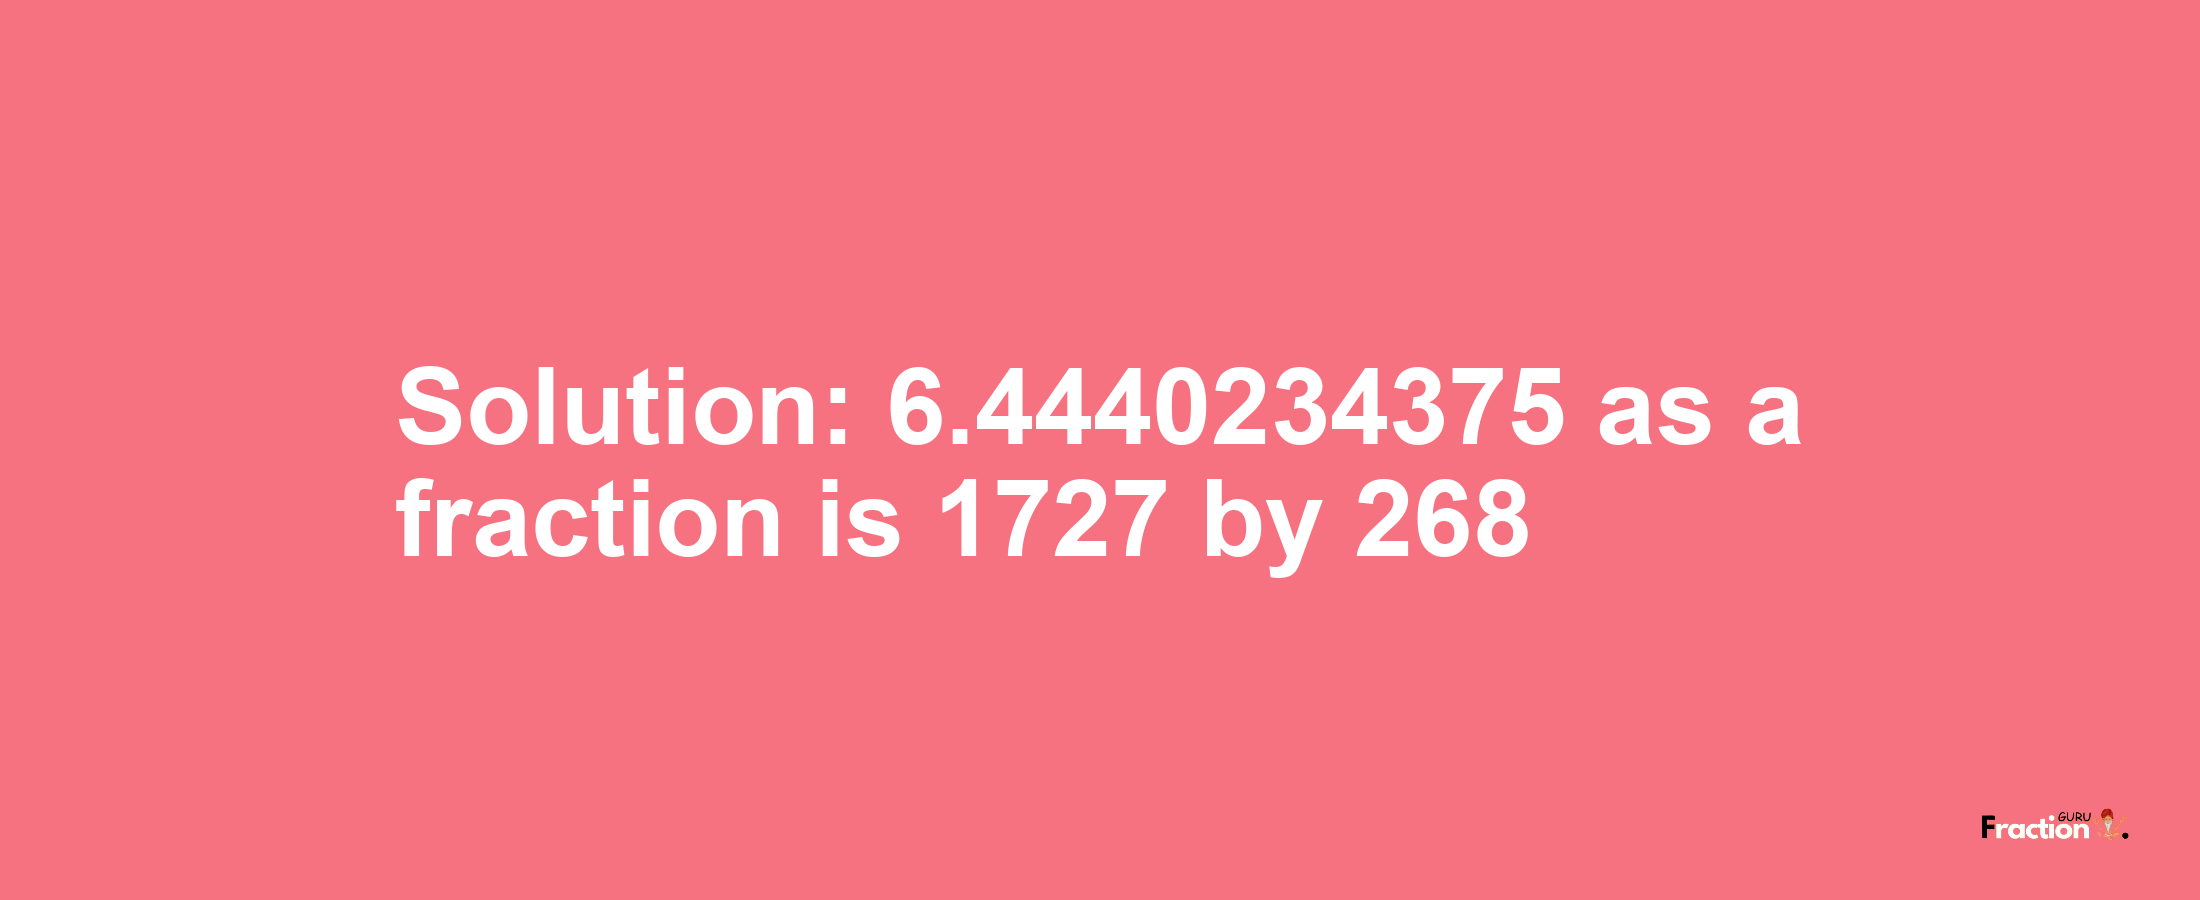 Solution:6.4440234375 as a fraction is 1727/268